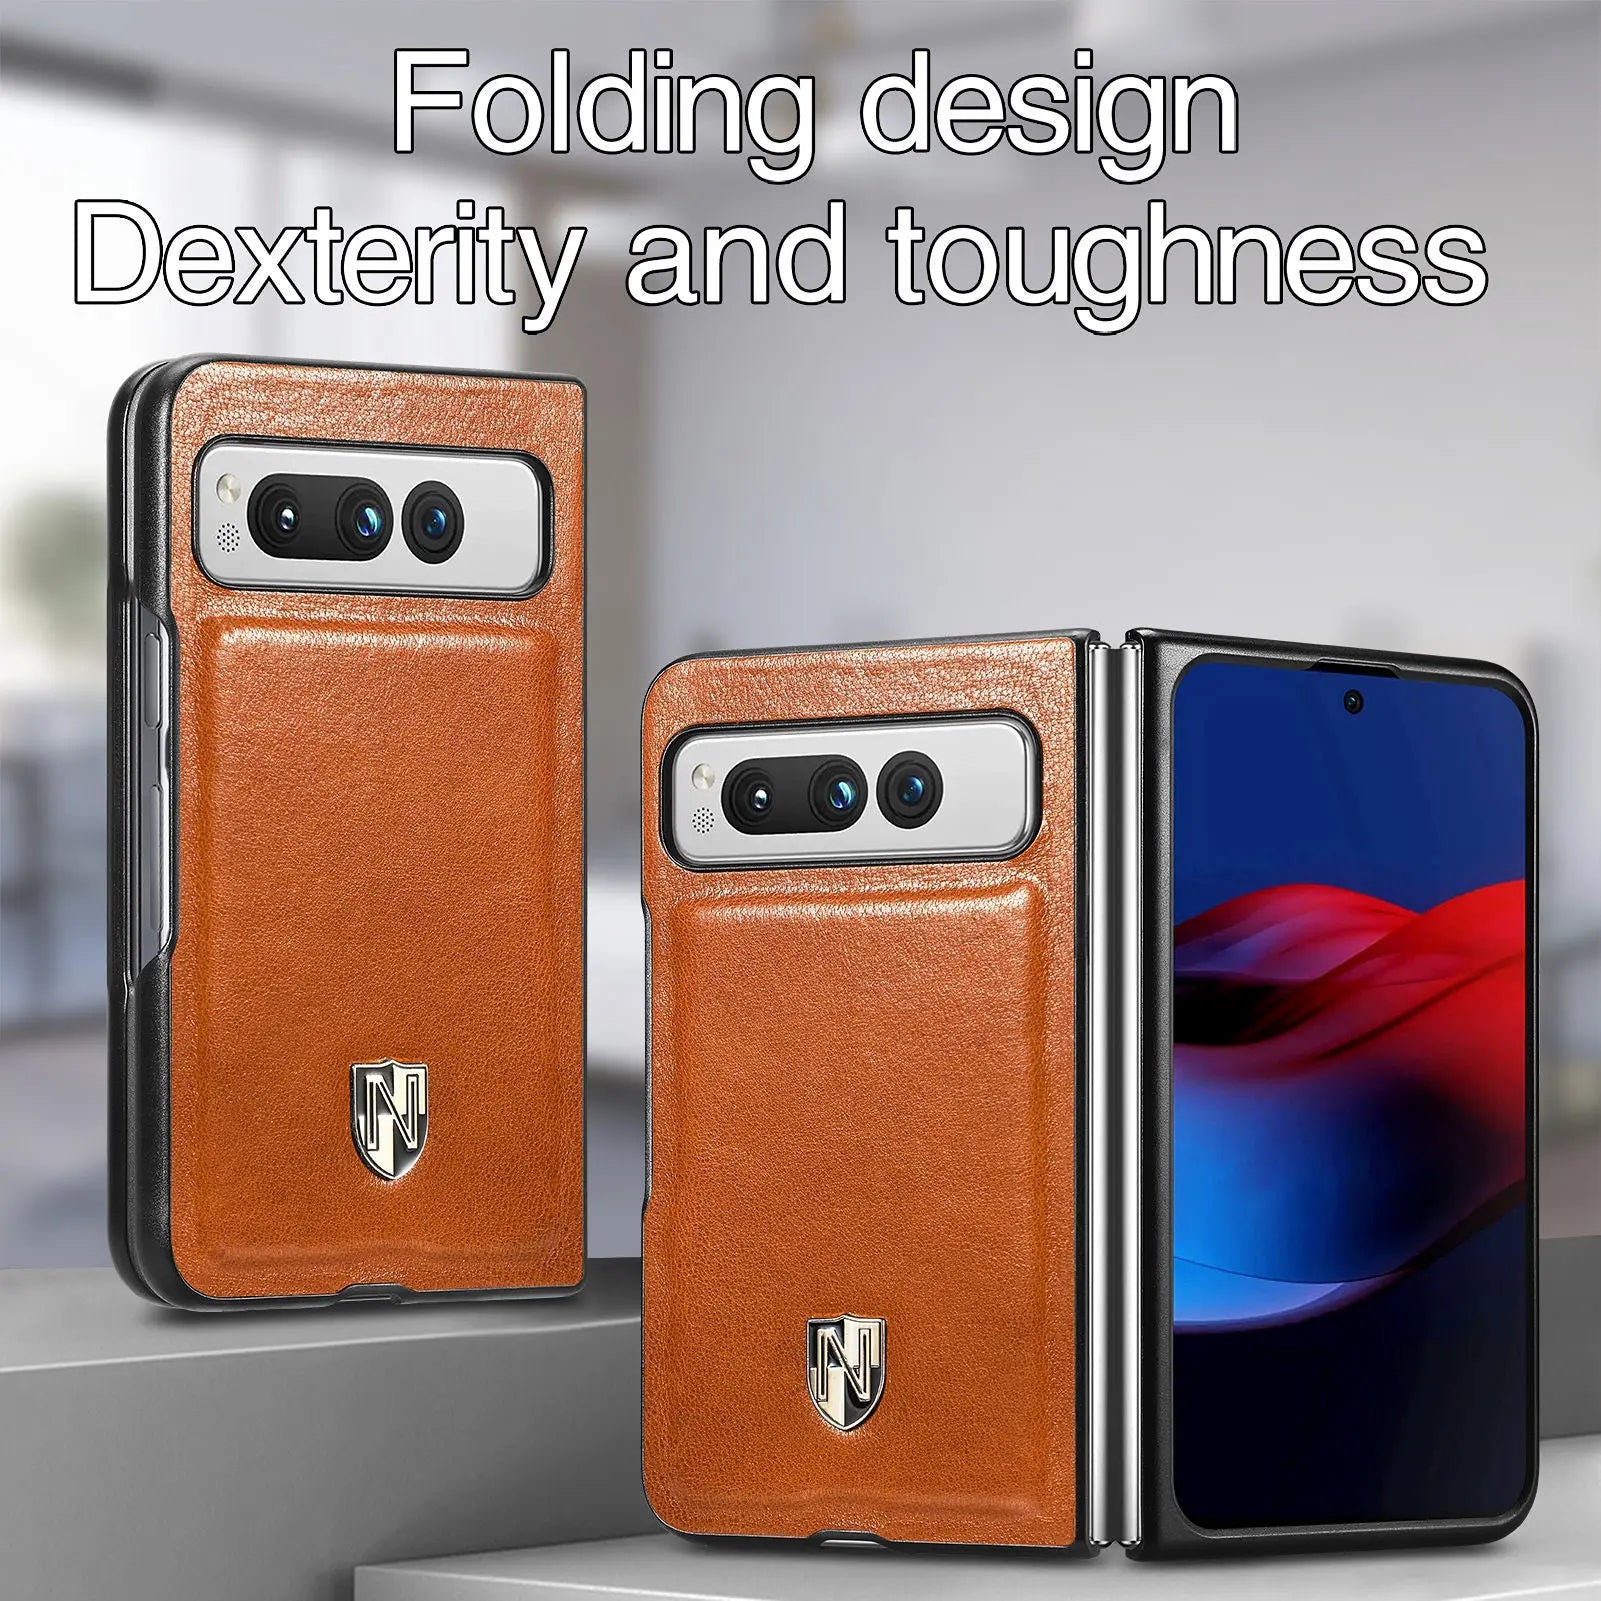 NobleGuard ProCase Gennuine Leather Case For Pixel Fold Phone Pinnacle Luxuries